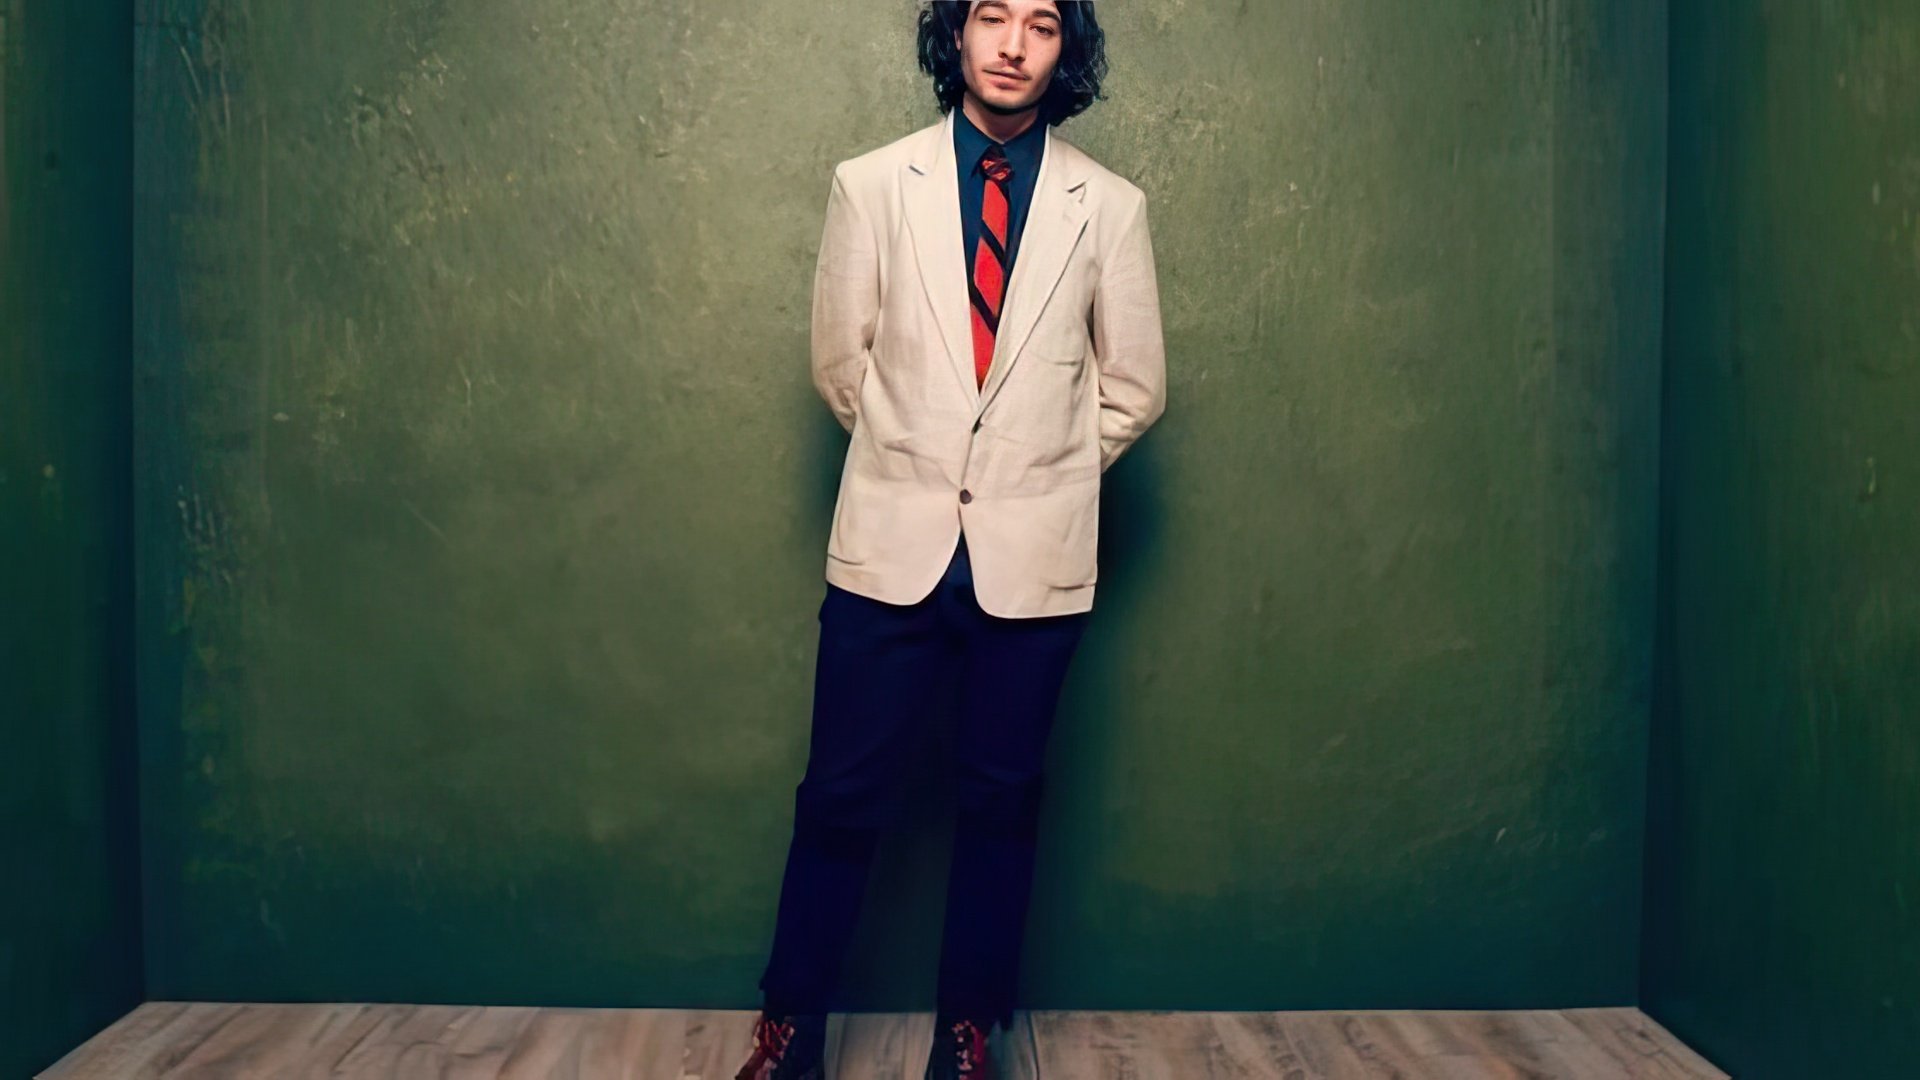 Ezra Miller’s photoshoot for «The Stanford Prison Experiment»